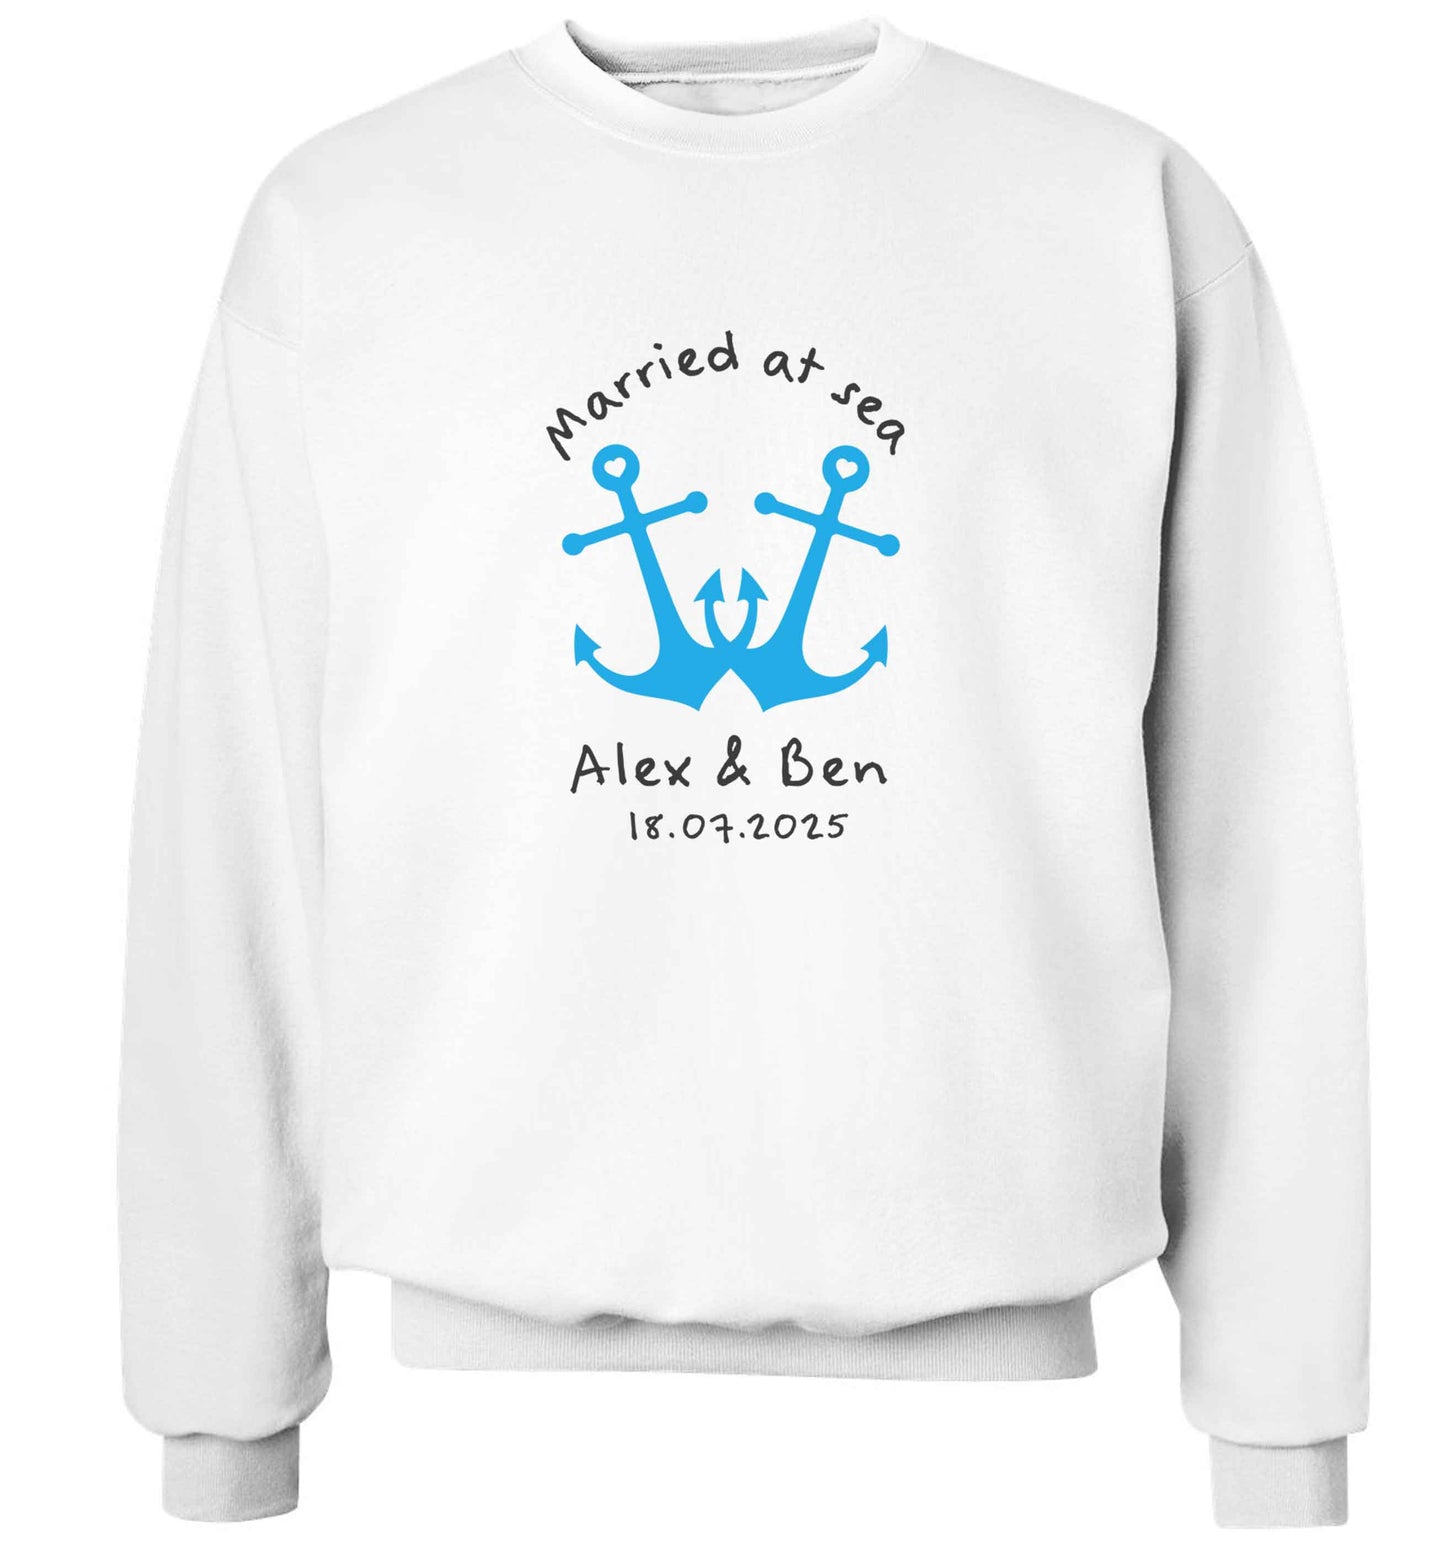 Married at sea blue anchors adult's unisex white sweater 2XL